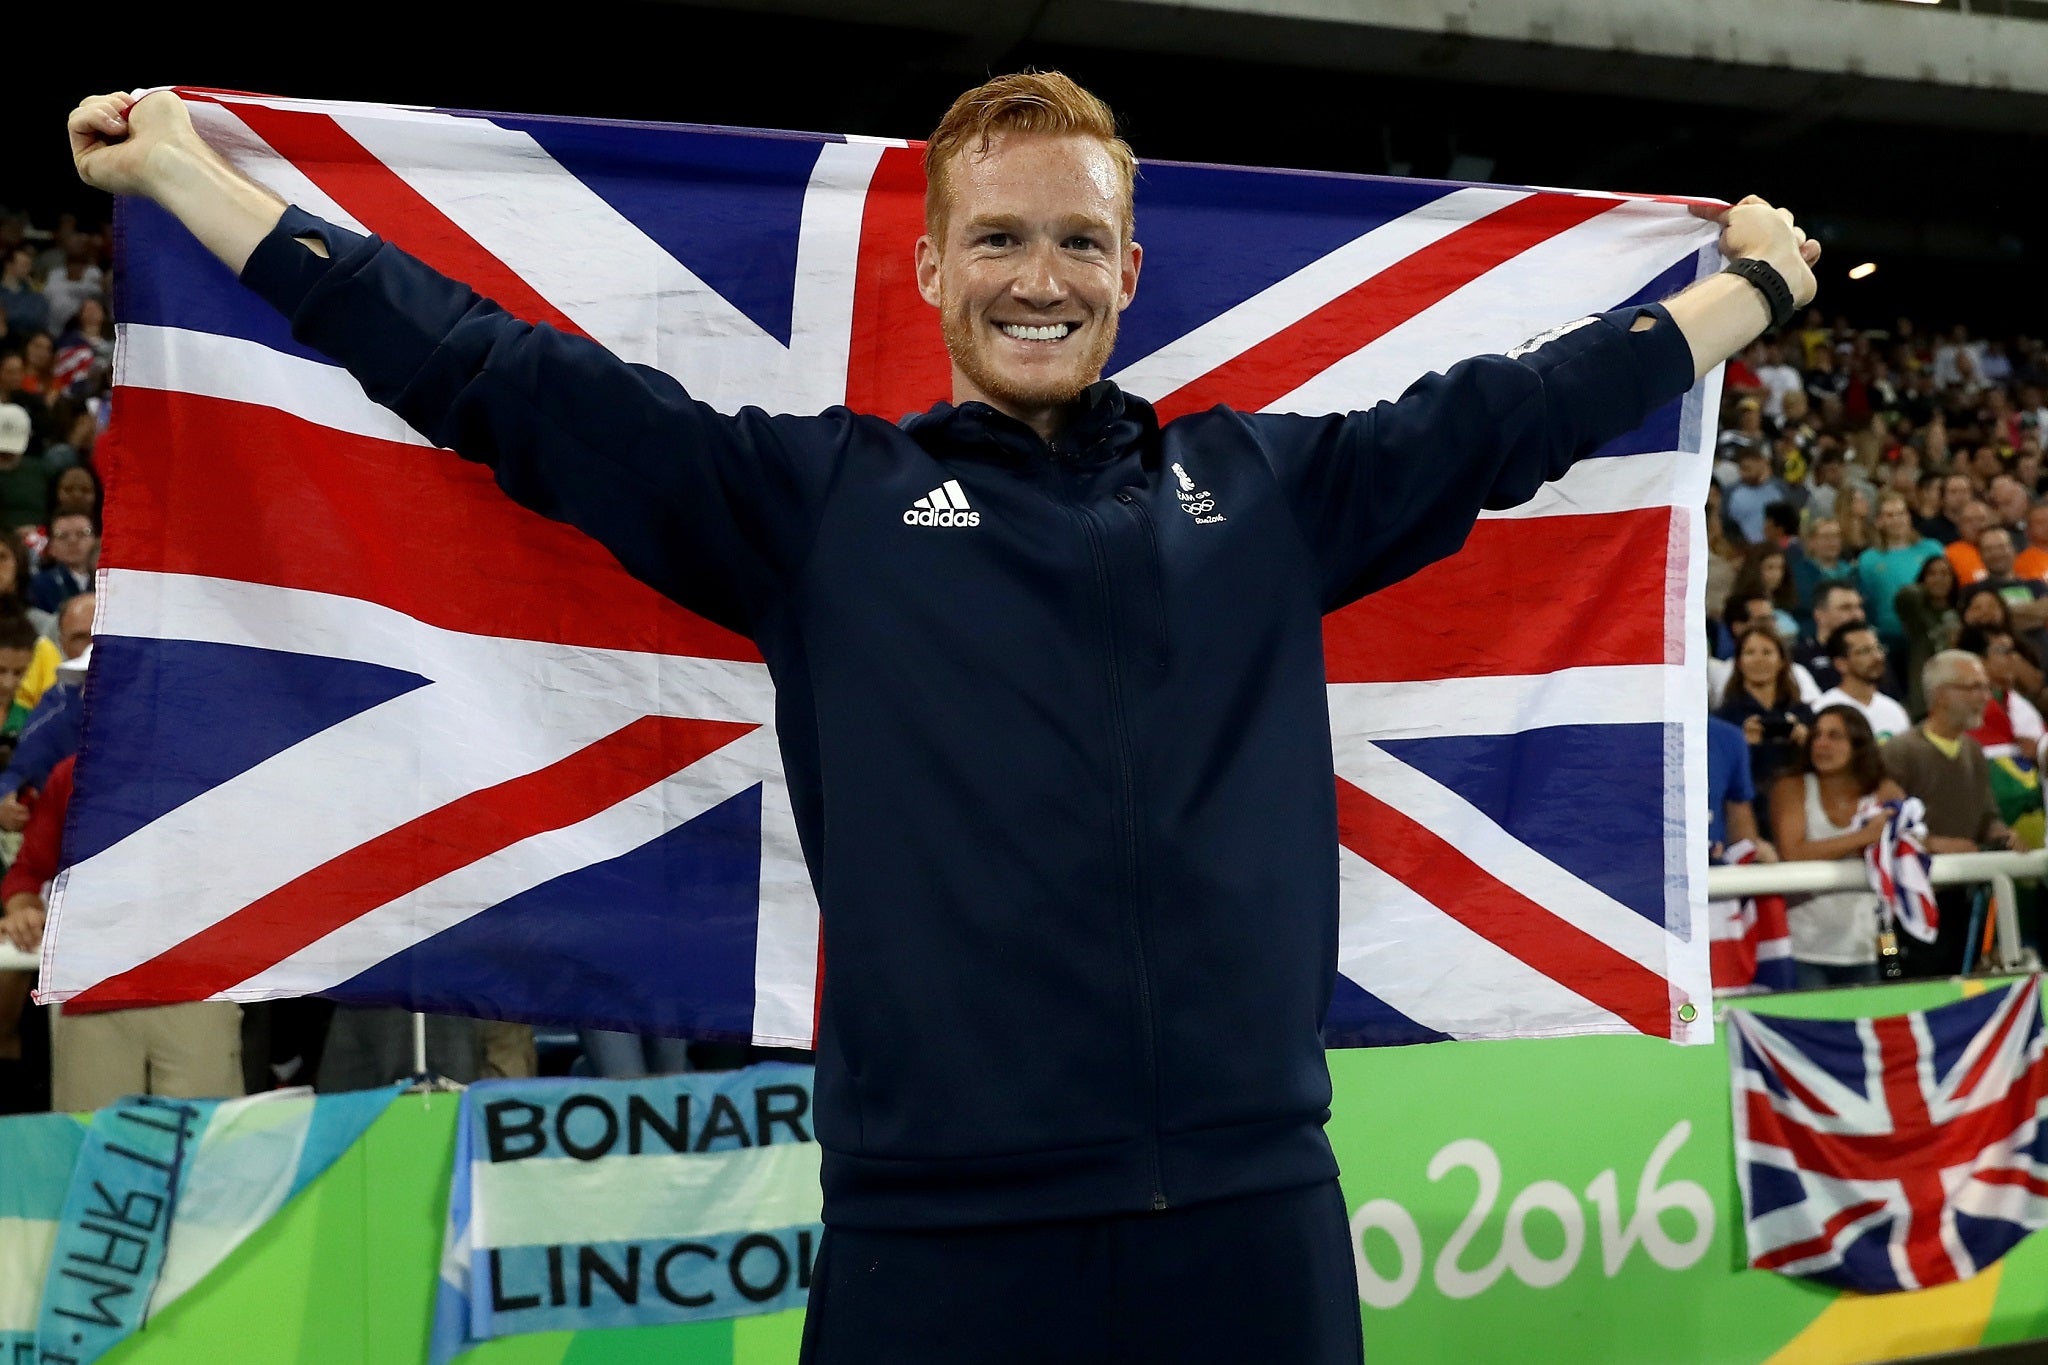 Greg Rutherford celebrates after clinching bronze in the men's long jump